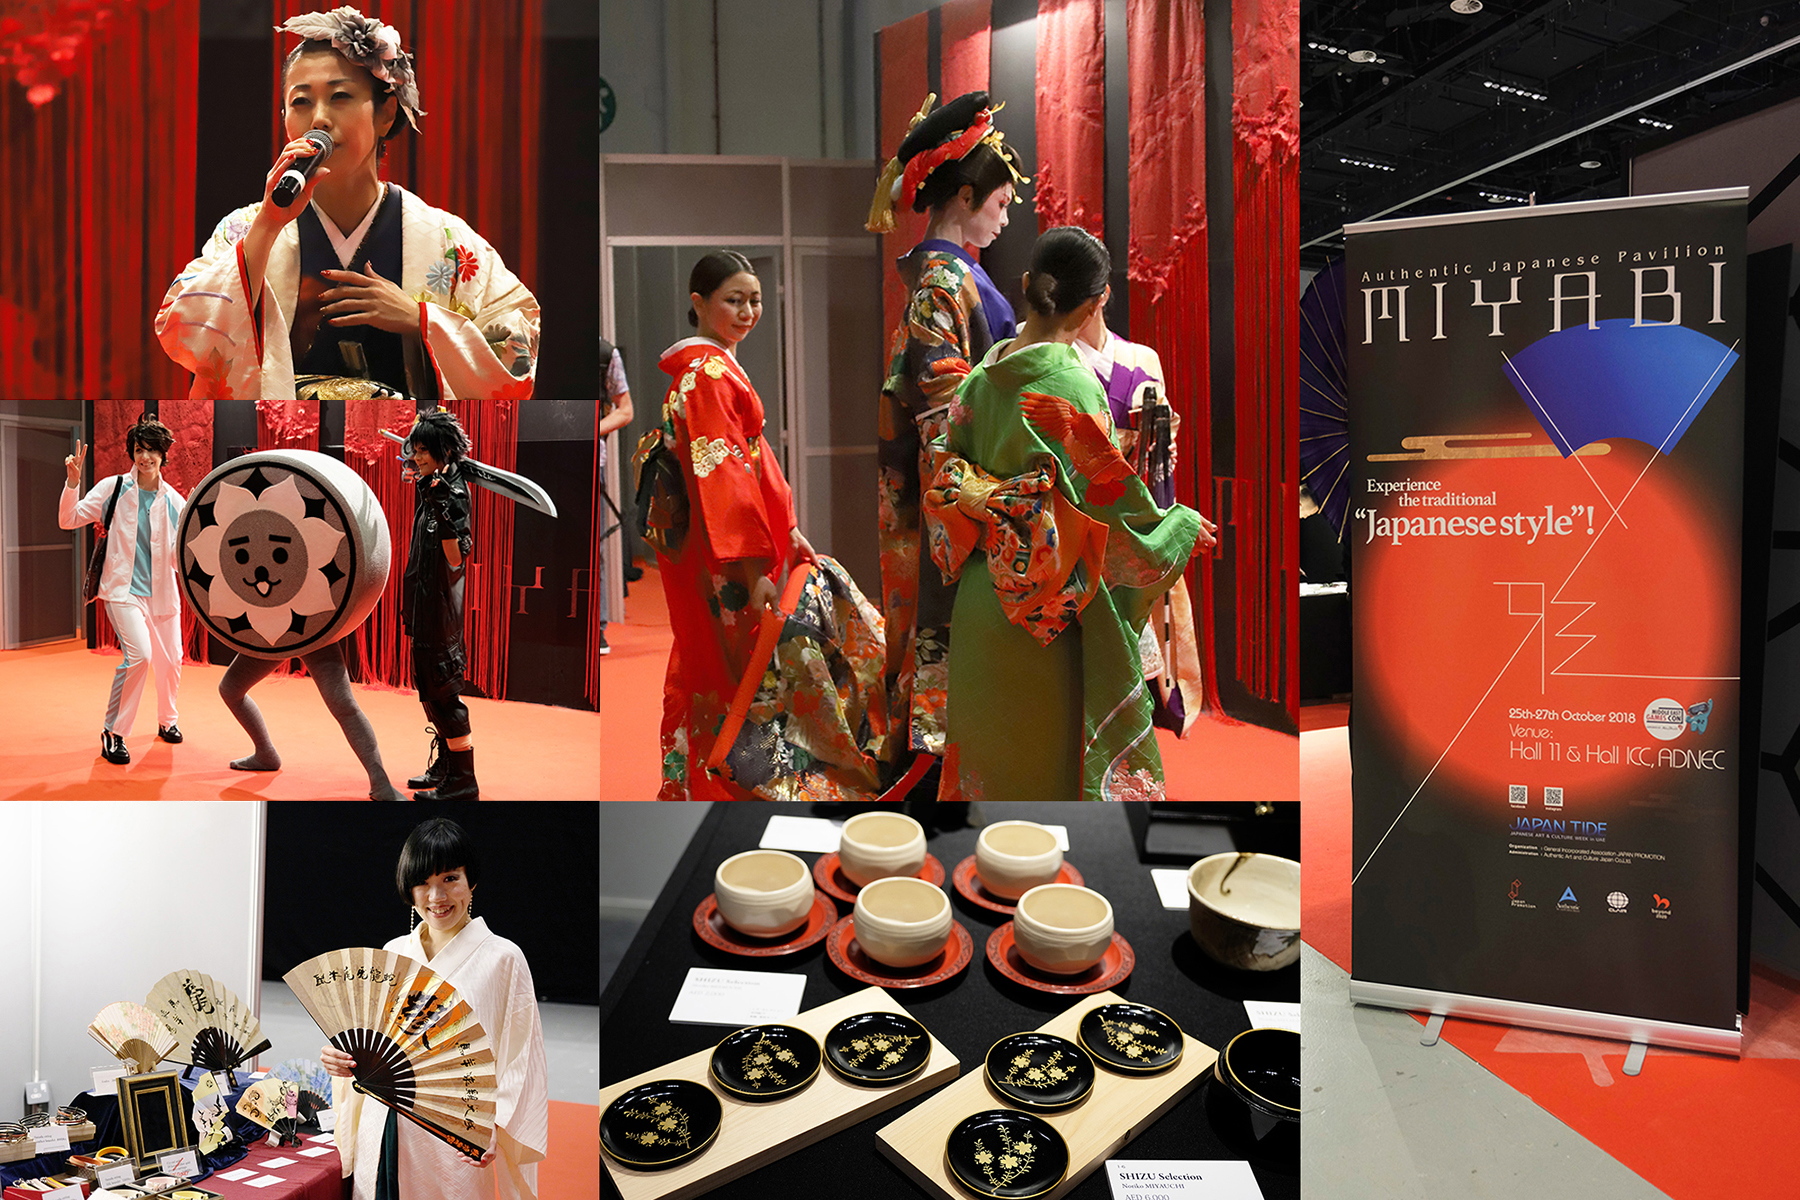 20181102【Middle East Games Con/Traditional Cultures】Middle East Games Con 2018 in Abu Dhabi “MIYABI”Report!